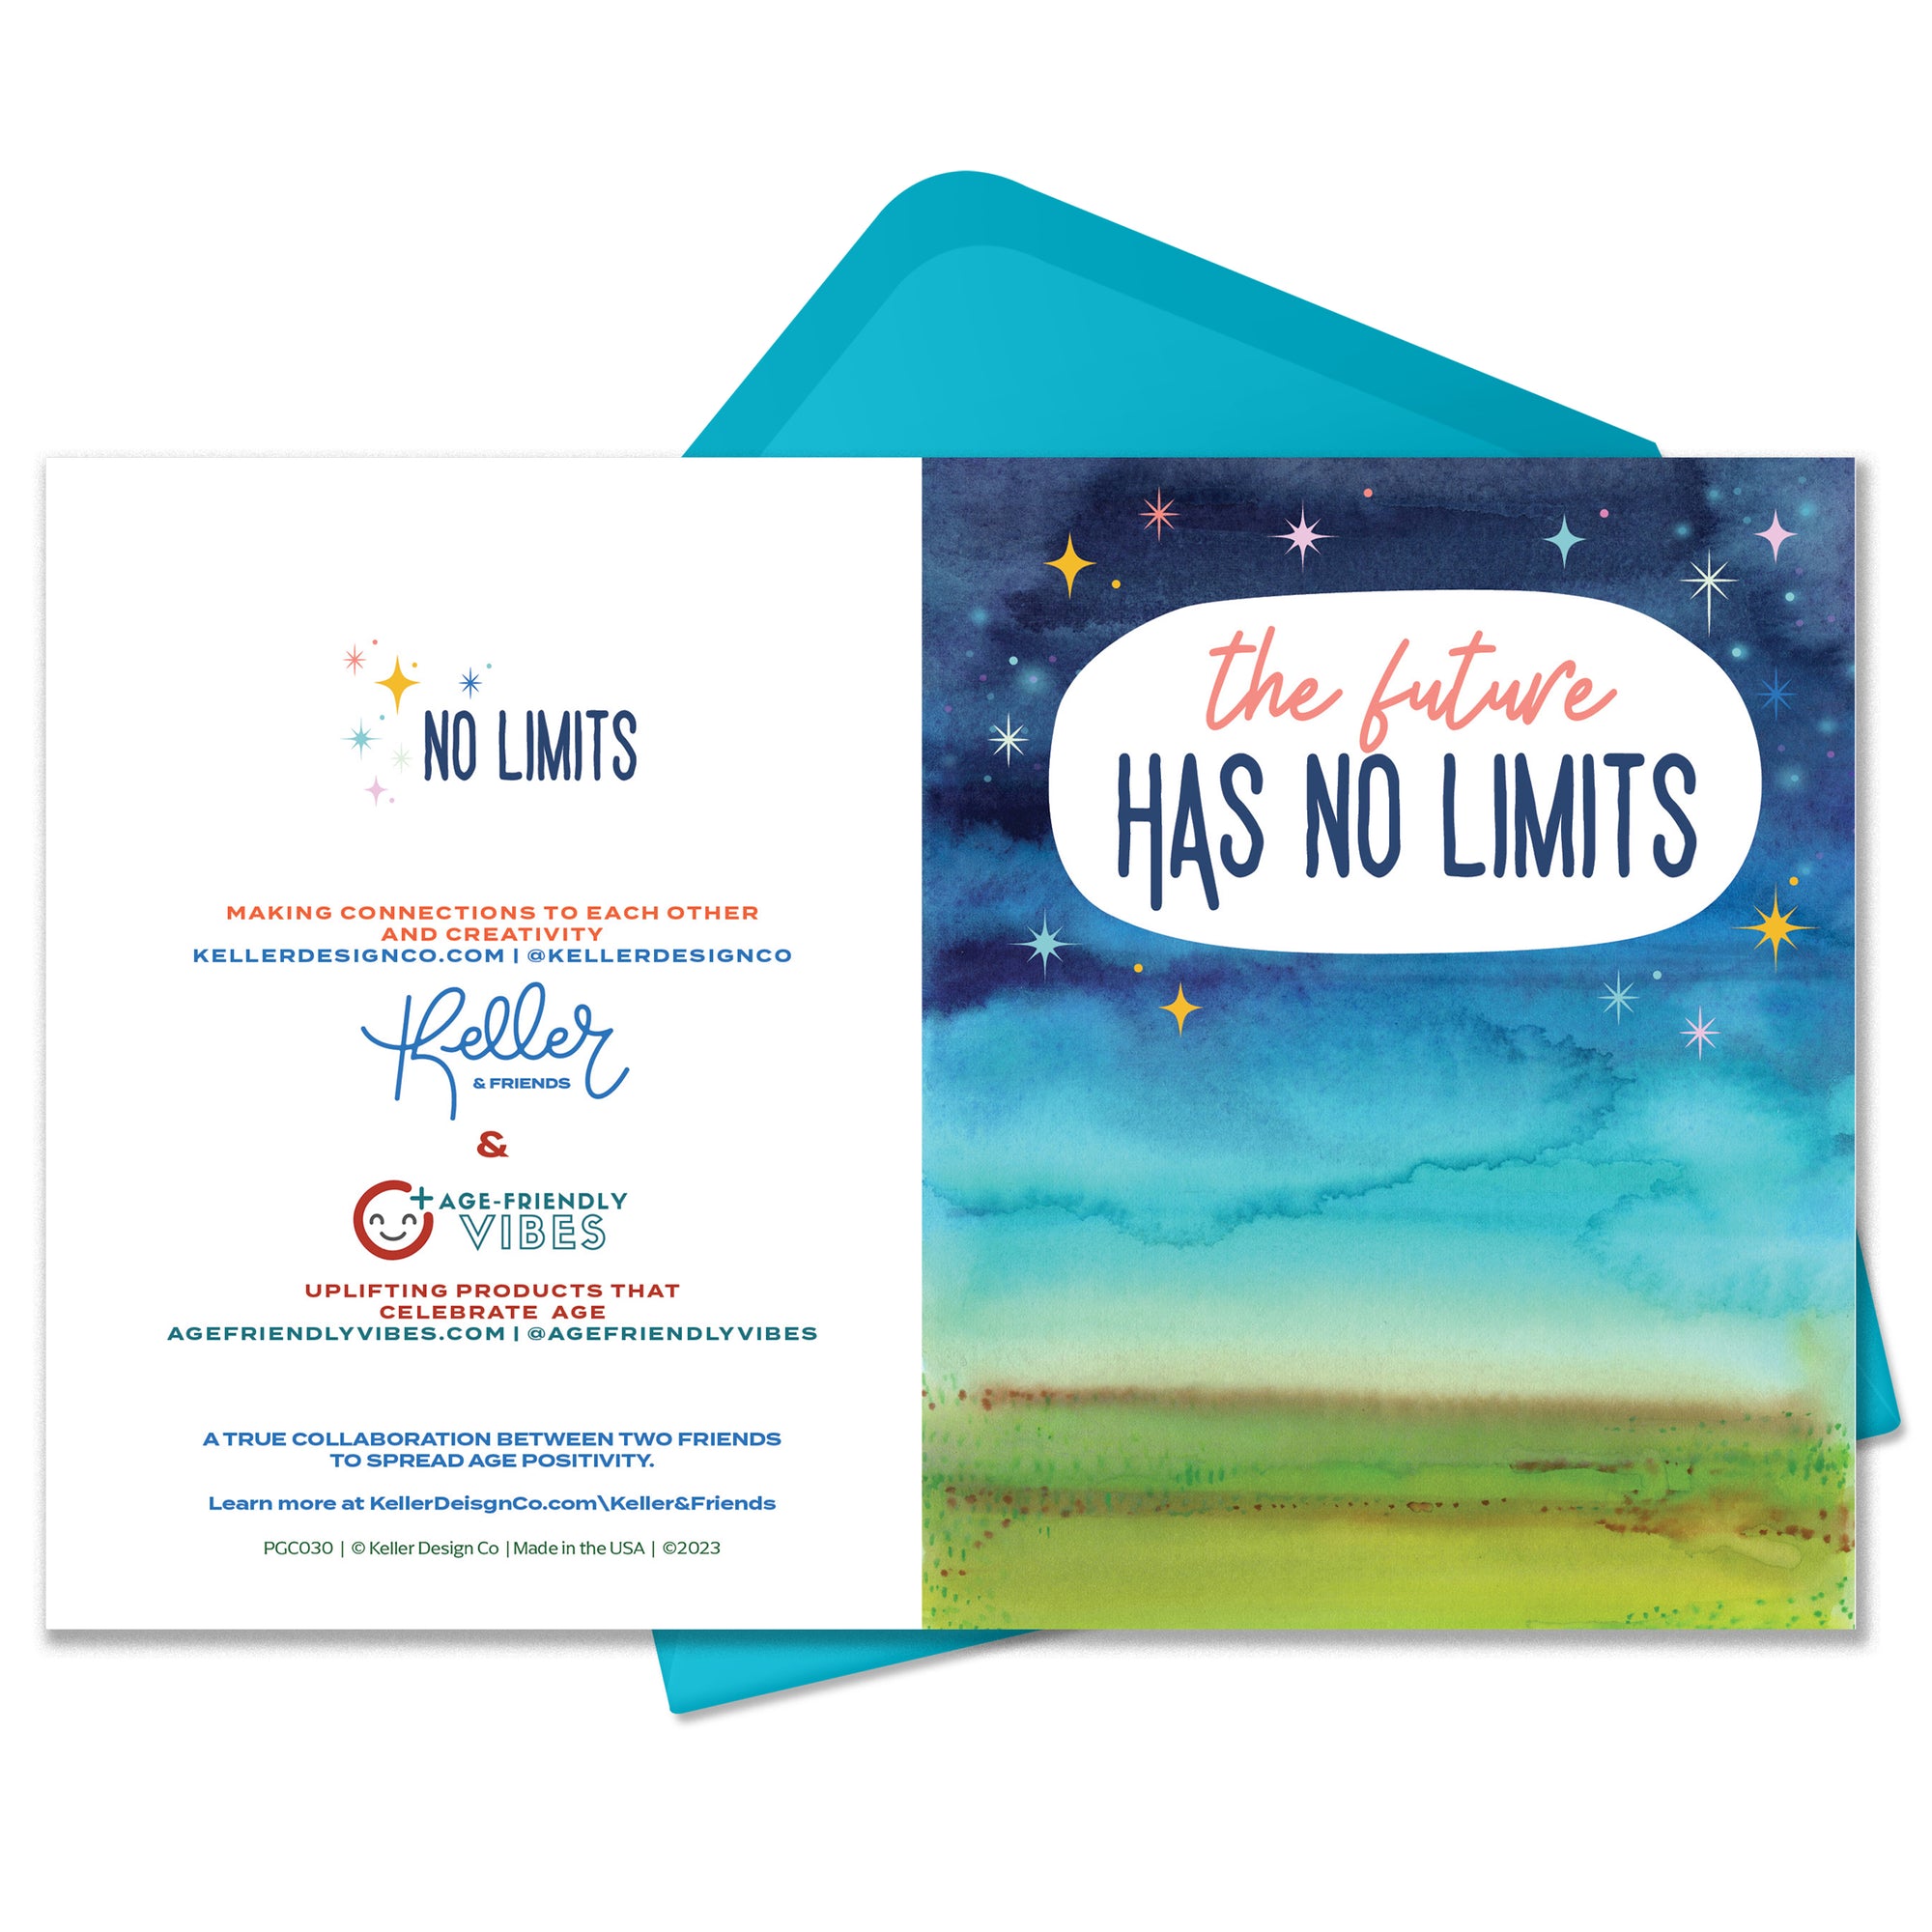 The Future Has No Limits Greeting cards. WAtercolor landscape with sparkly stars. There is a turquoise blue envelope and it sits on a white background. 